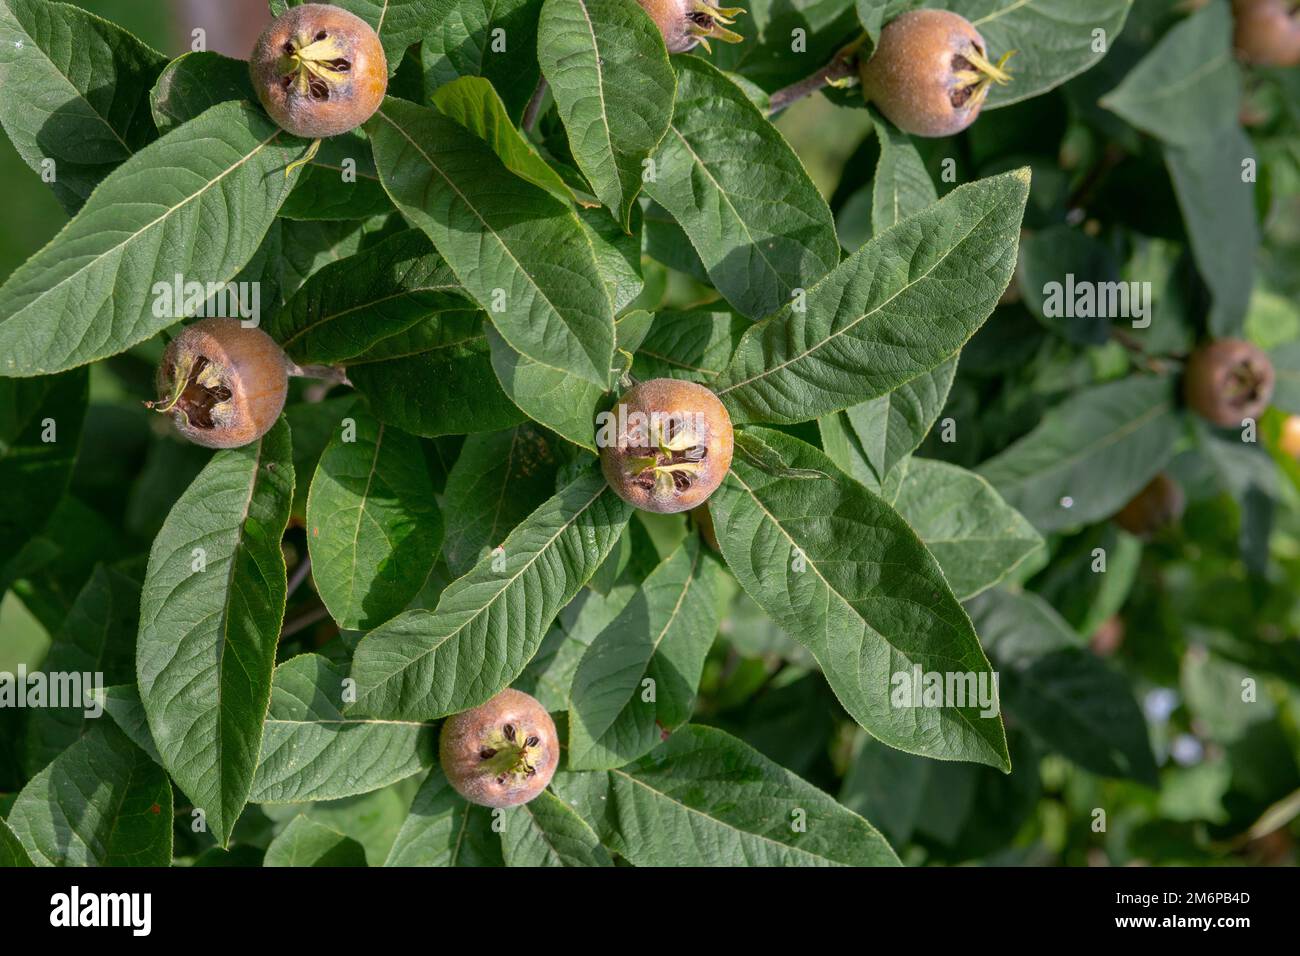 The medlar or common medlar (Mespilus or Crataegus Germanica) fruits and leaves. Stock Photo